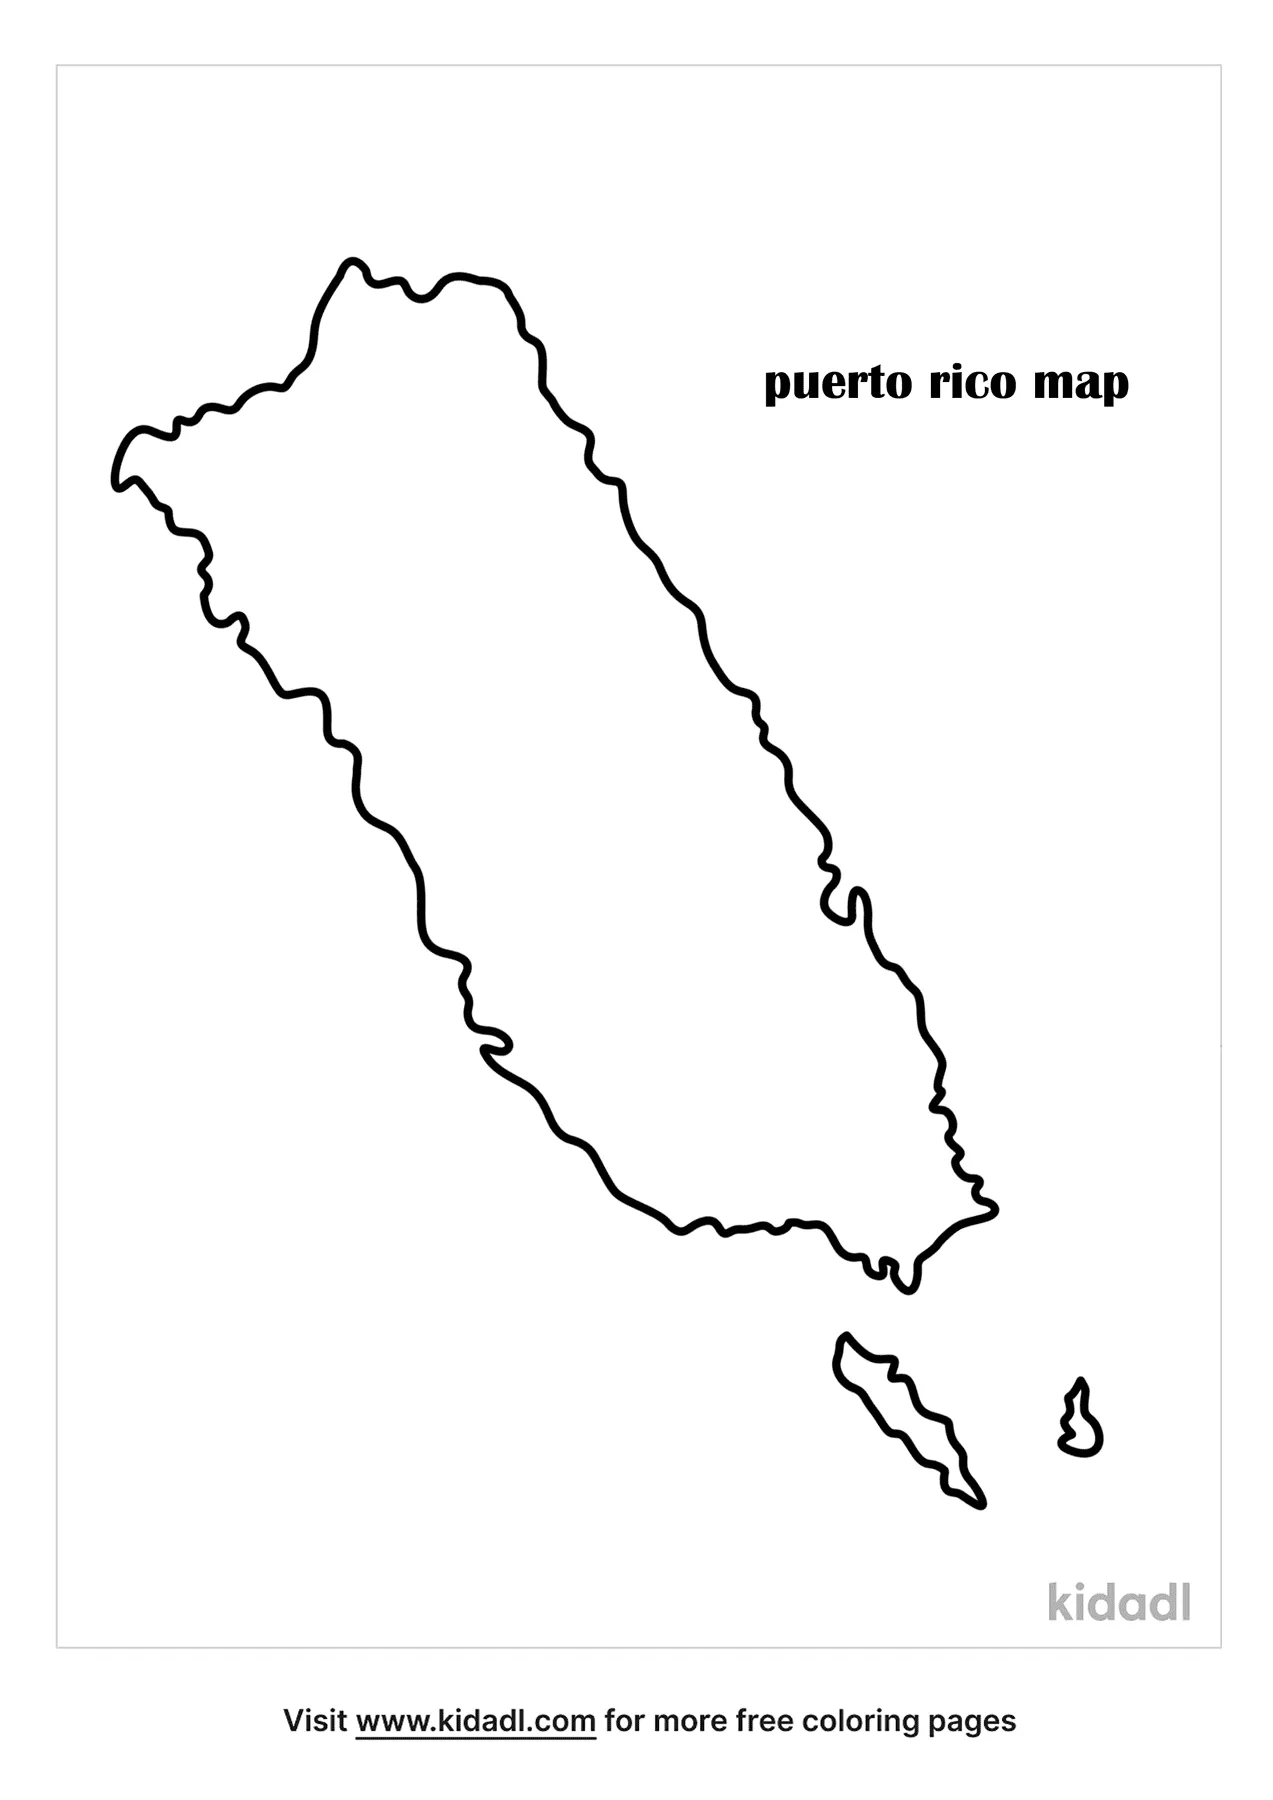 Free puerto rico map coloring page coloring page printables